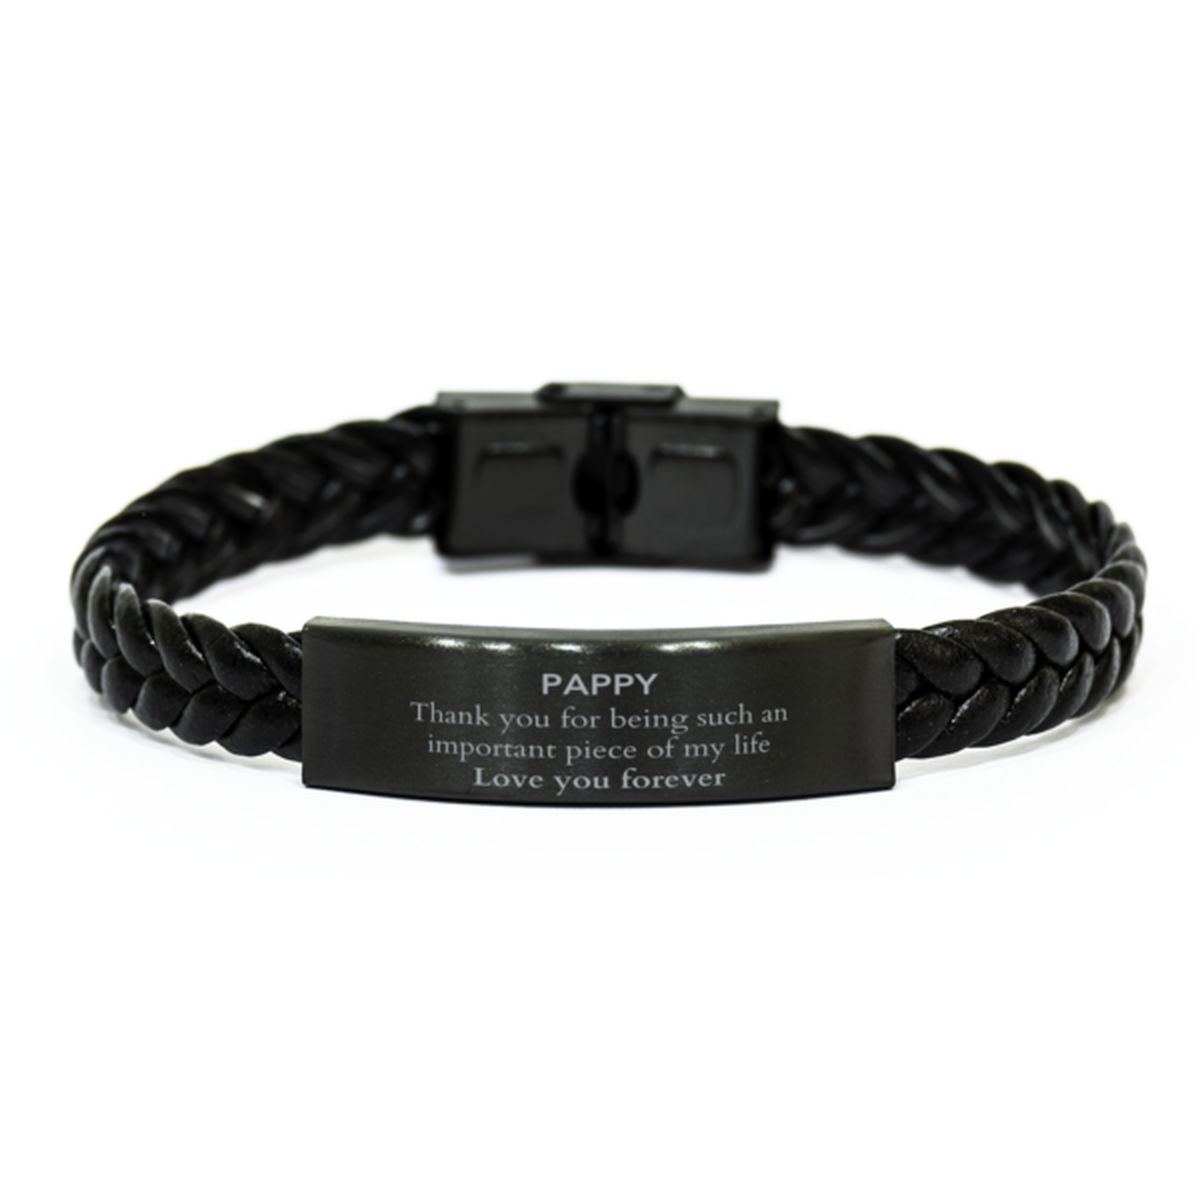 Appropriate Pappy Braided Leather Bracelet Epic Birthday Gifts for Pappy Thank you for being such an important piece of my life Pappy Christmas Mothers Fathers Day